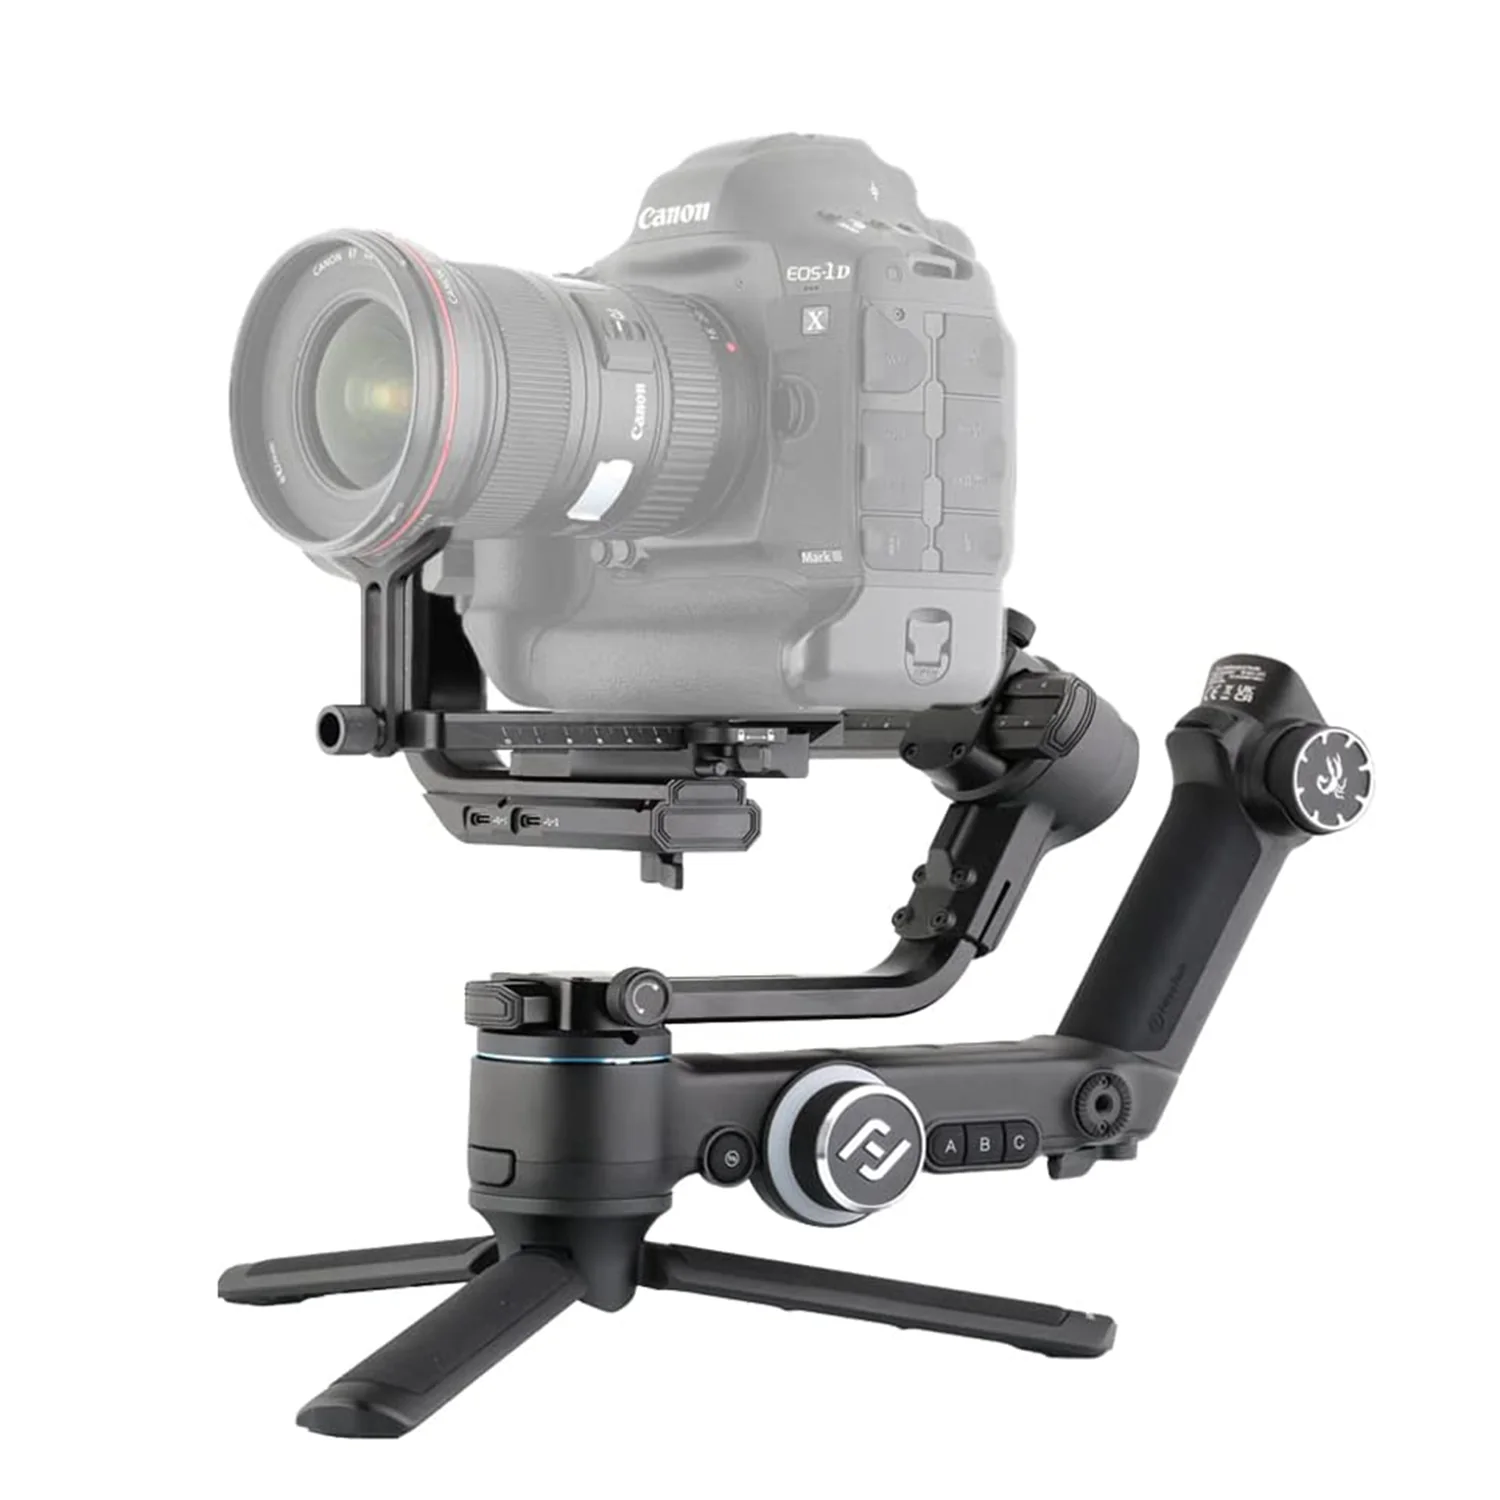 SCORP Pro Detachable 3-Axis Professional Gimbal Stabilizer